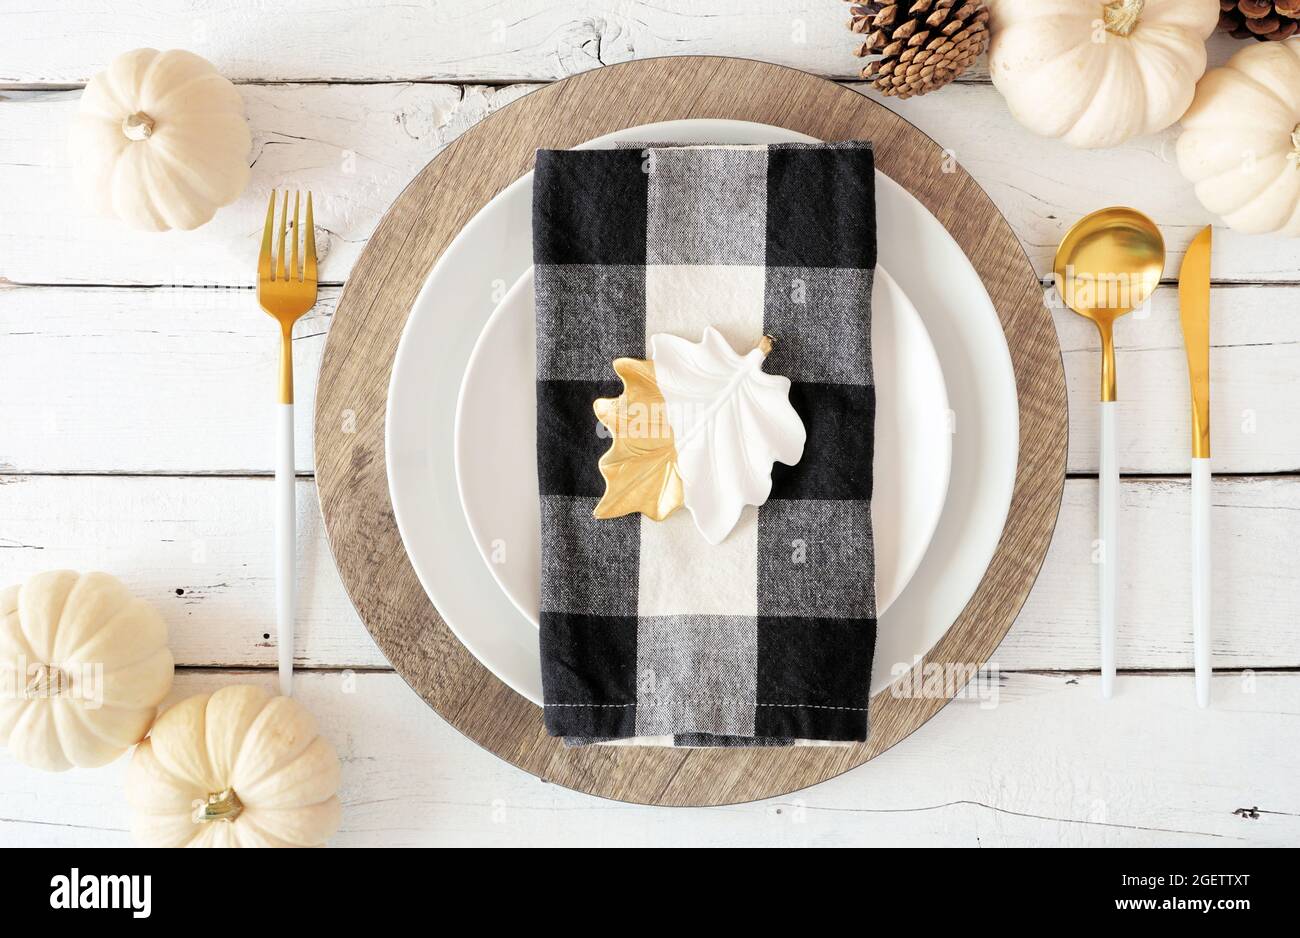 Autumn harvest or thanksgiving dinner table setting with plates, flatware, buffalo plaid napkin, pumpkins and decor. Top view on a white wood backgrou Stock Photo